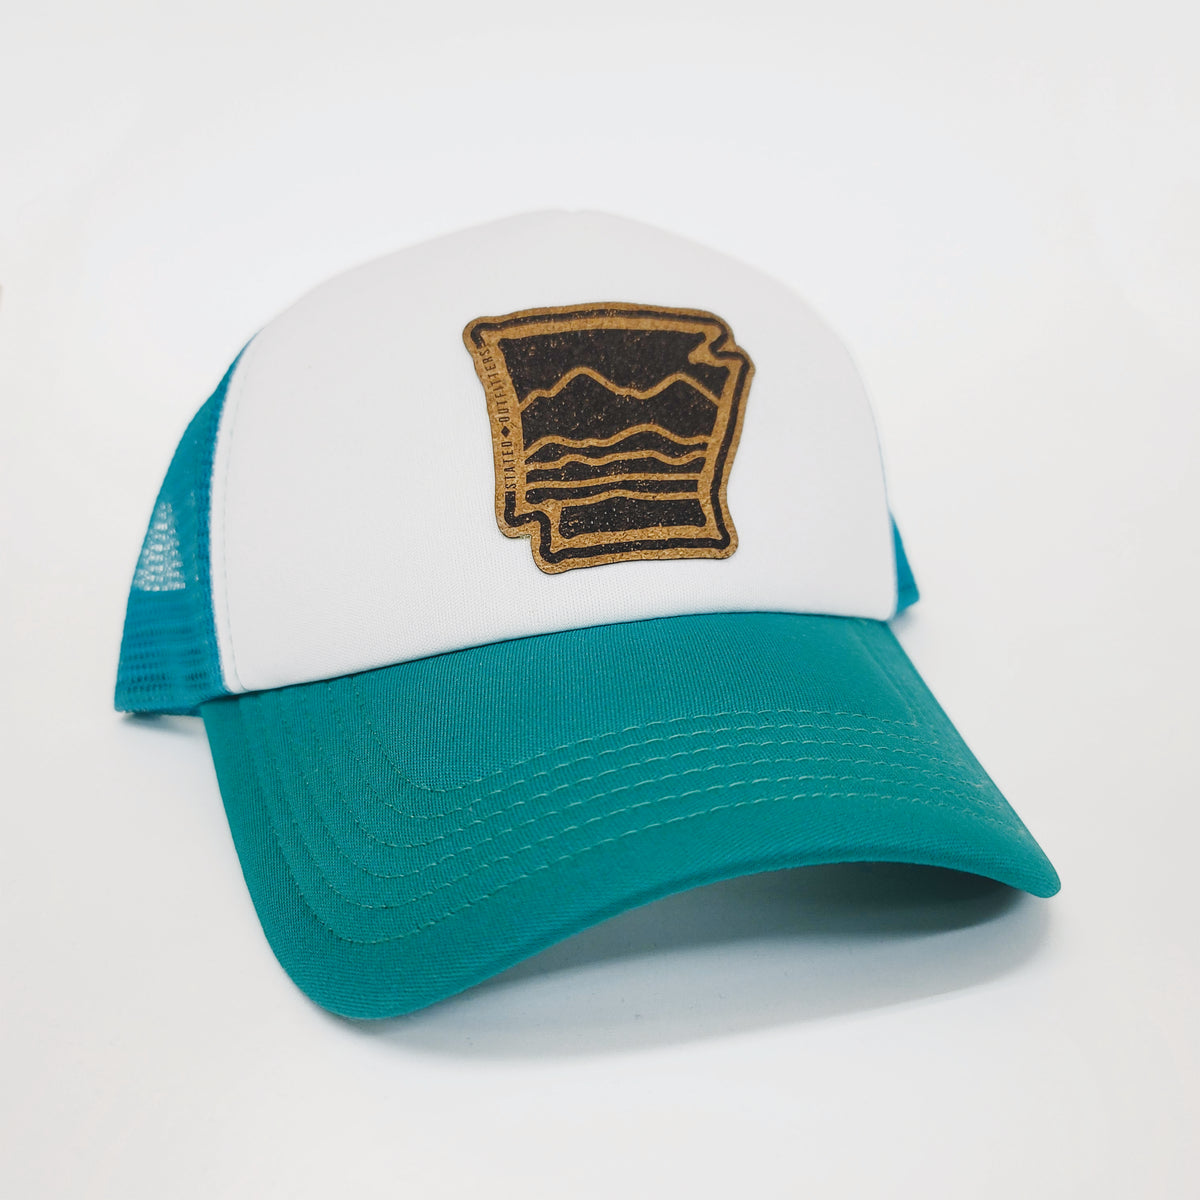 Stated Outfitters AR Patch Teal/White Foam Hat